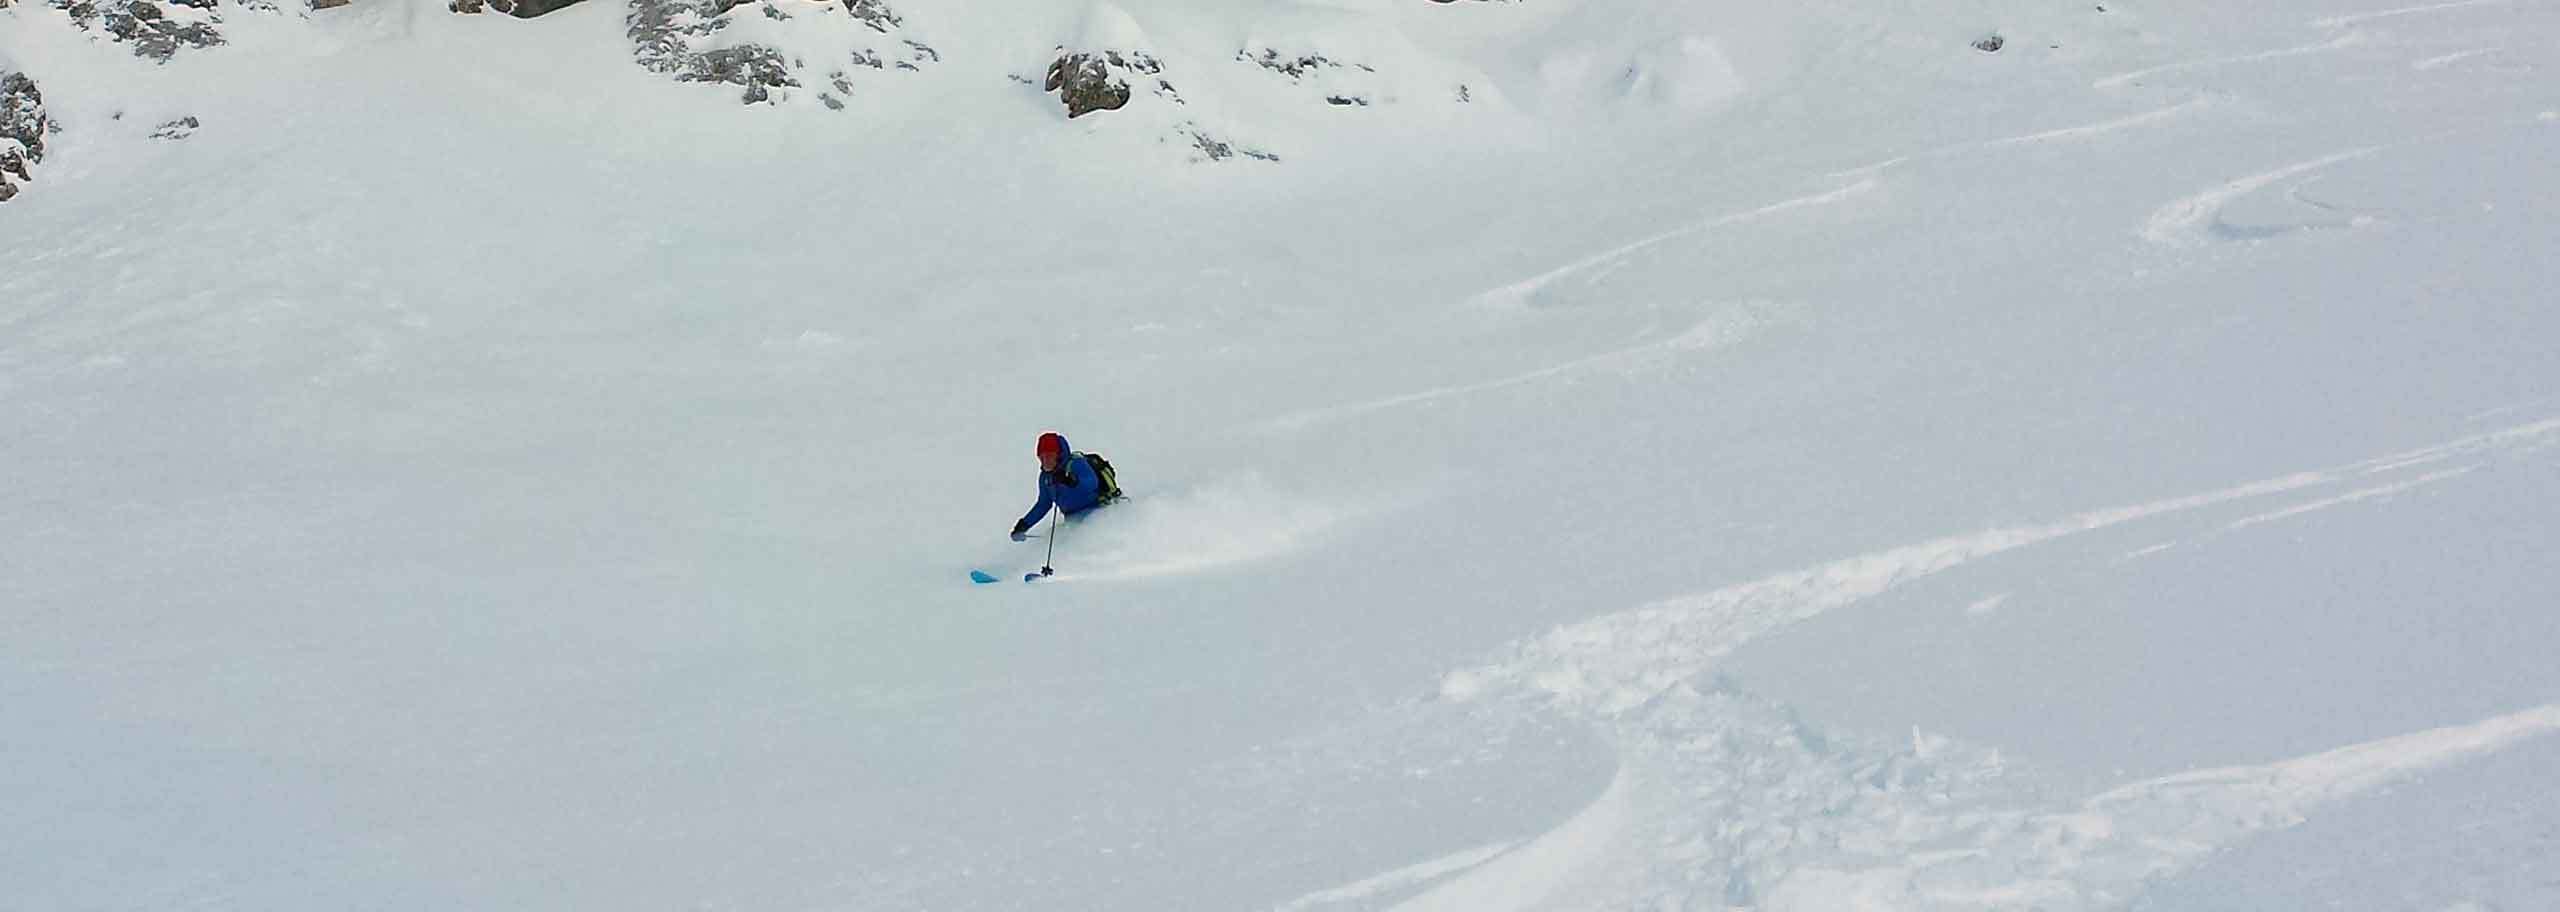 Off-piste Skiing in Madesimo, Guided Freeride Skiing